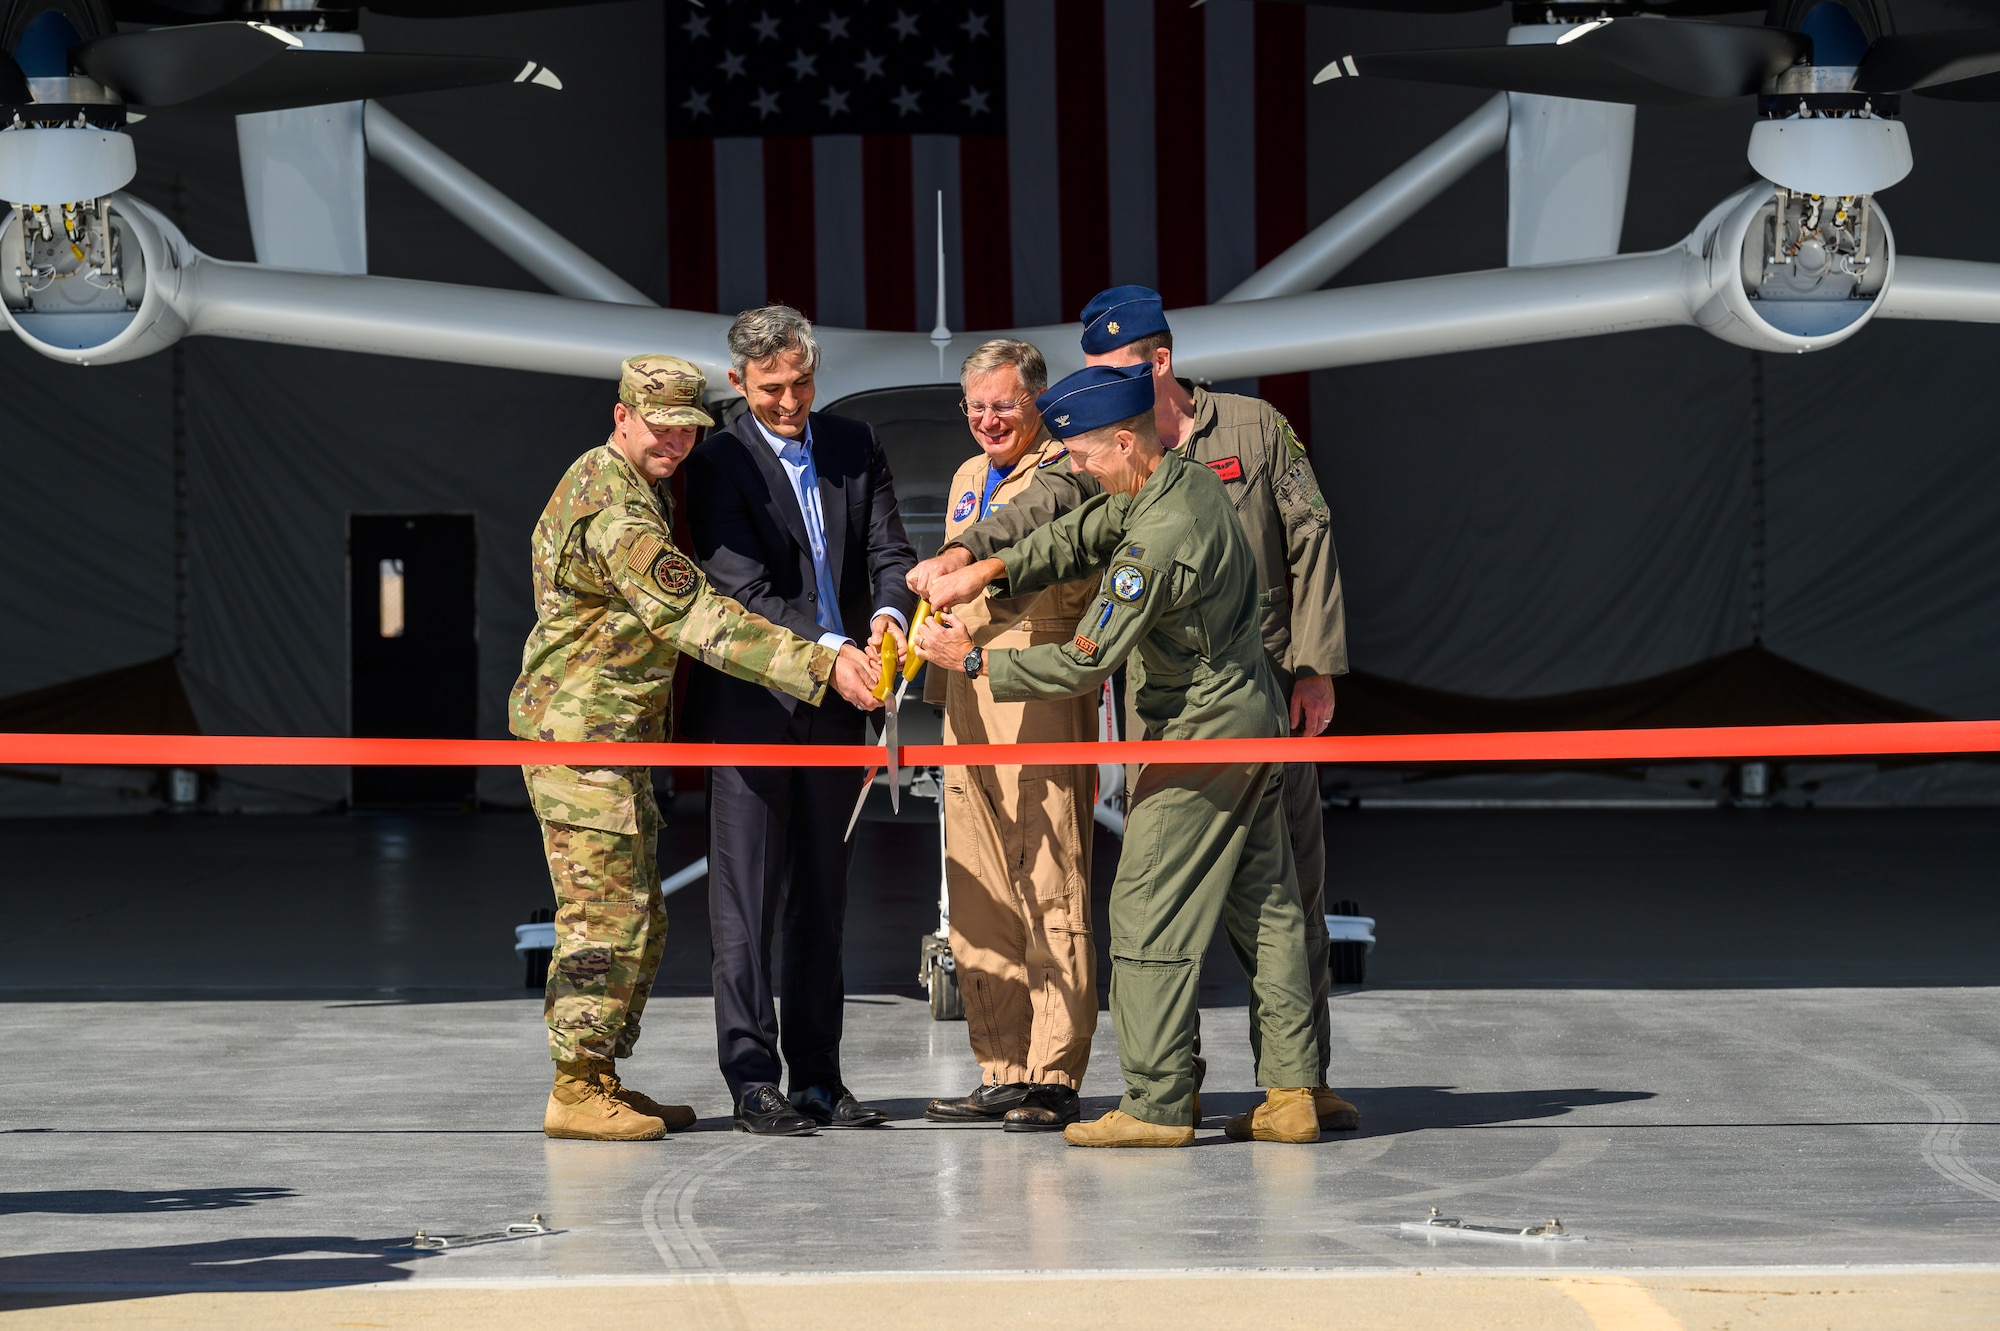 Col. Elliott Leigh, AFWERX director, Paul Sciarra, Joby Aviation, Inc. executive chairman, Wayne Ringleberg, NASA Armstrong Flight Research Center chief pilot, Col. Douglas Wickert, 412th Test Wing commander, and Maj. Phillip Woddhull, Emerging Technologies Integrated Test Force director, cut the ribbon officially opening a large area maintenance shelter for Joby Aviation’s electric vertical take-off and landing test aircraft during a ceremony on Edwards Air Force Base, Sept. 25. (Air Force photo by Richard Gonzales)